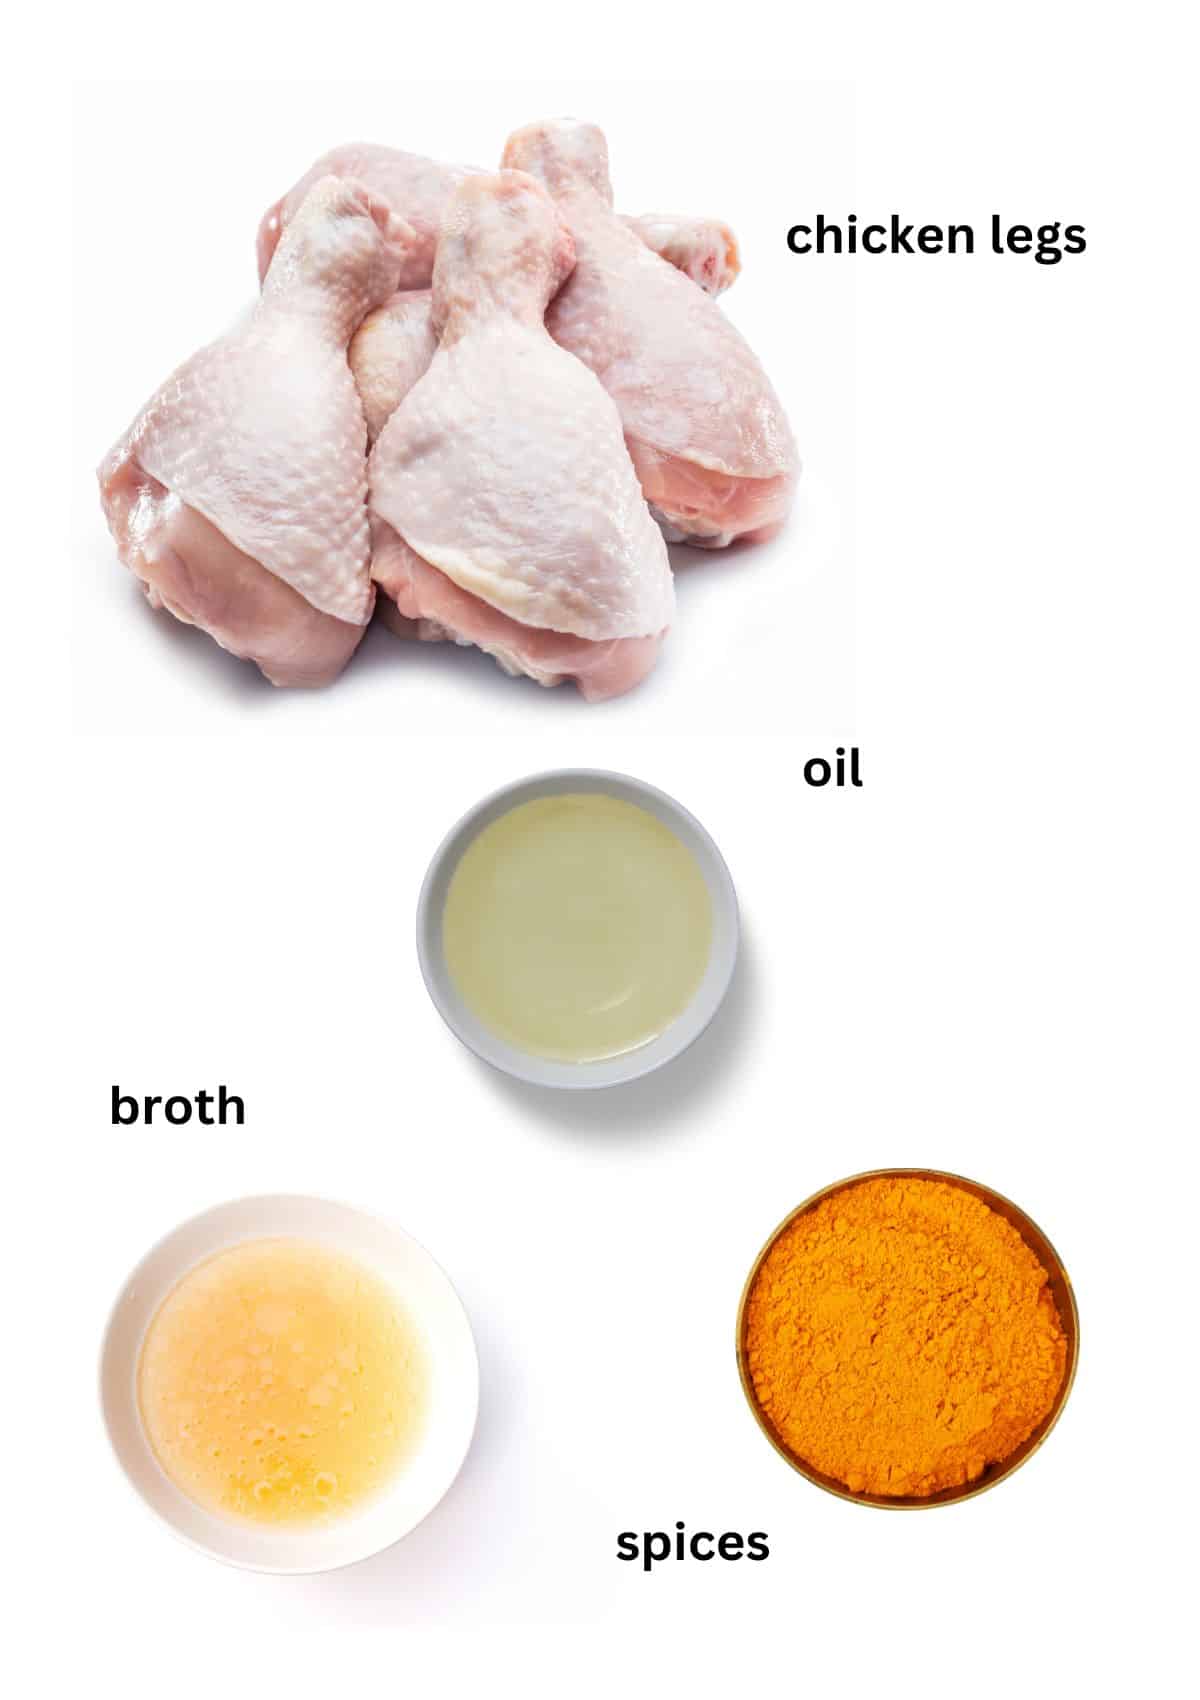 raw chicken legs and bowls with oil, broth and seasoning.